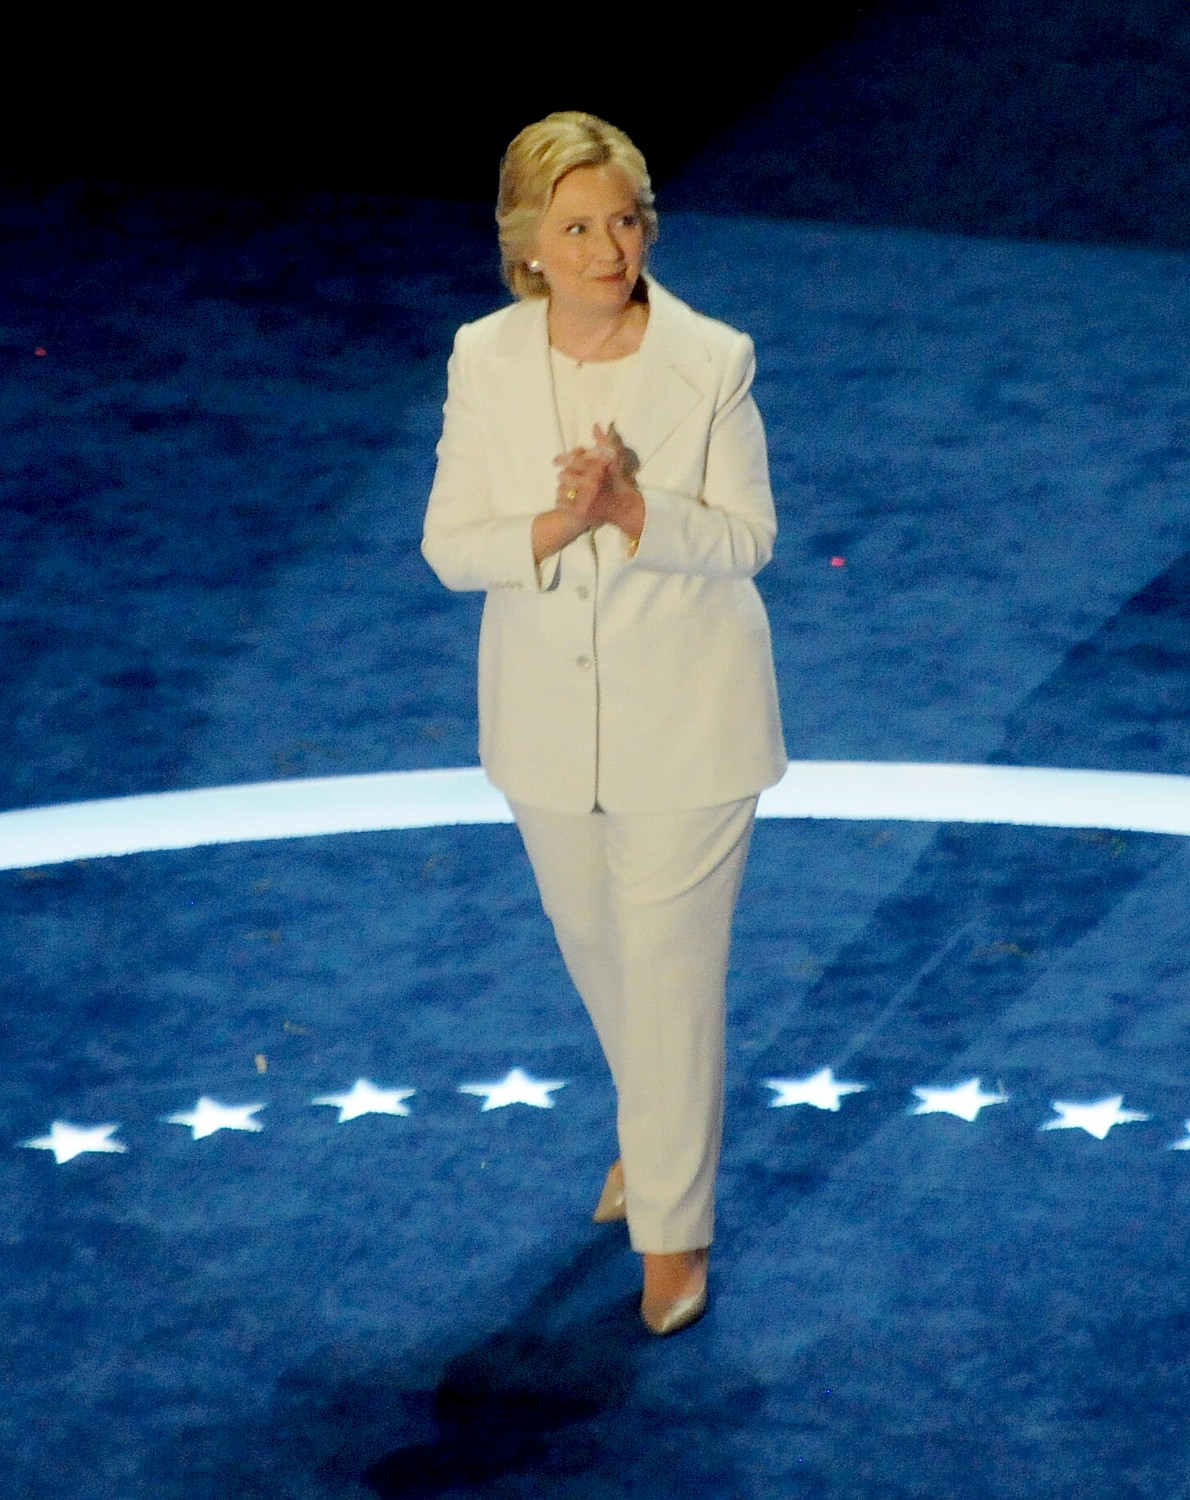 Historic nomination of Hillary Rodham Clinton for President by Democratic party, at Democratic National Convention in Philadelphia, July 2016.